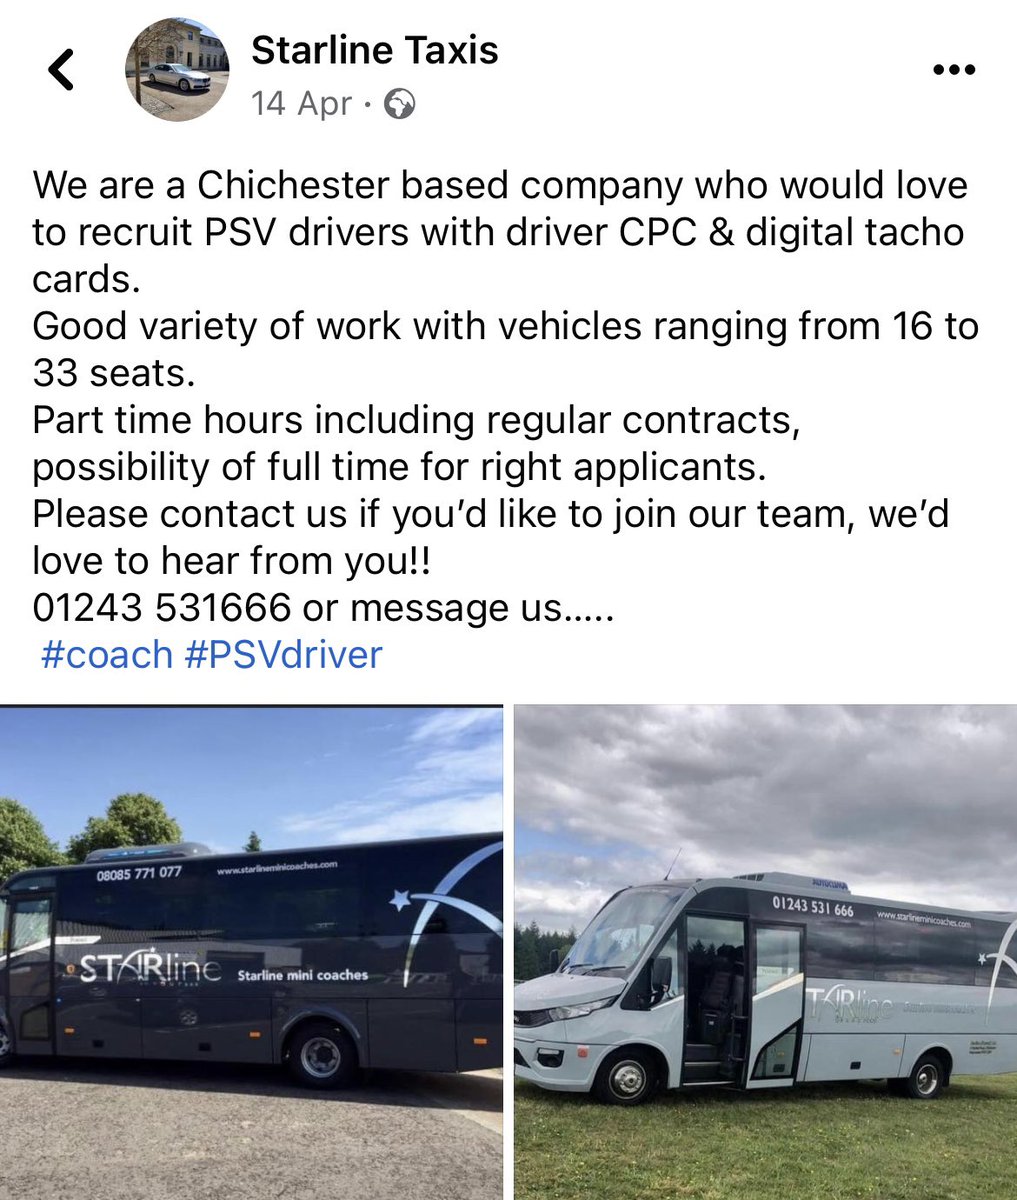 Recruiting!! 
PSV drivers for Chichester based company. Please contact us if you would like any information, we’d love to hear from you. #PSV #coachdrivers